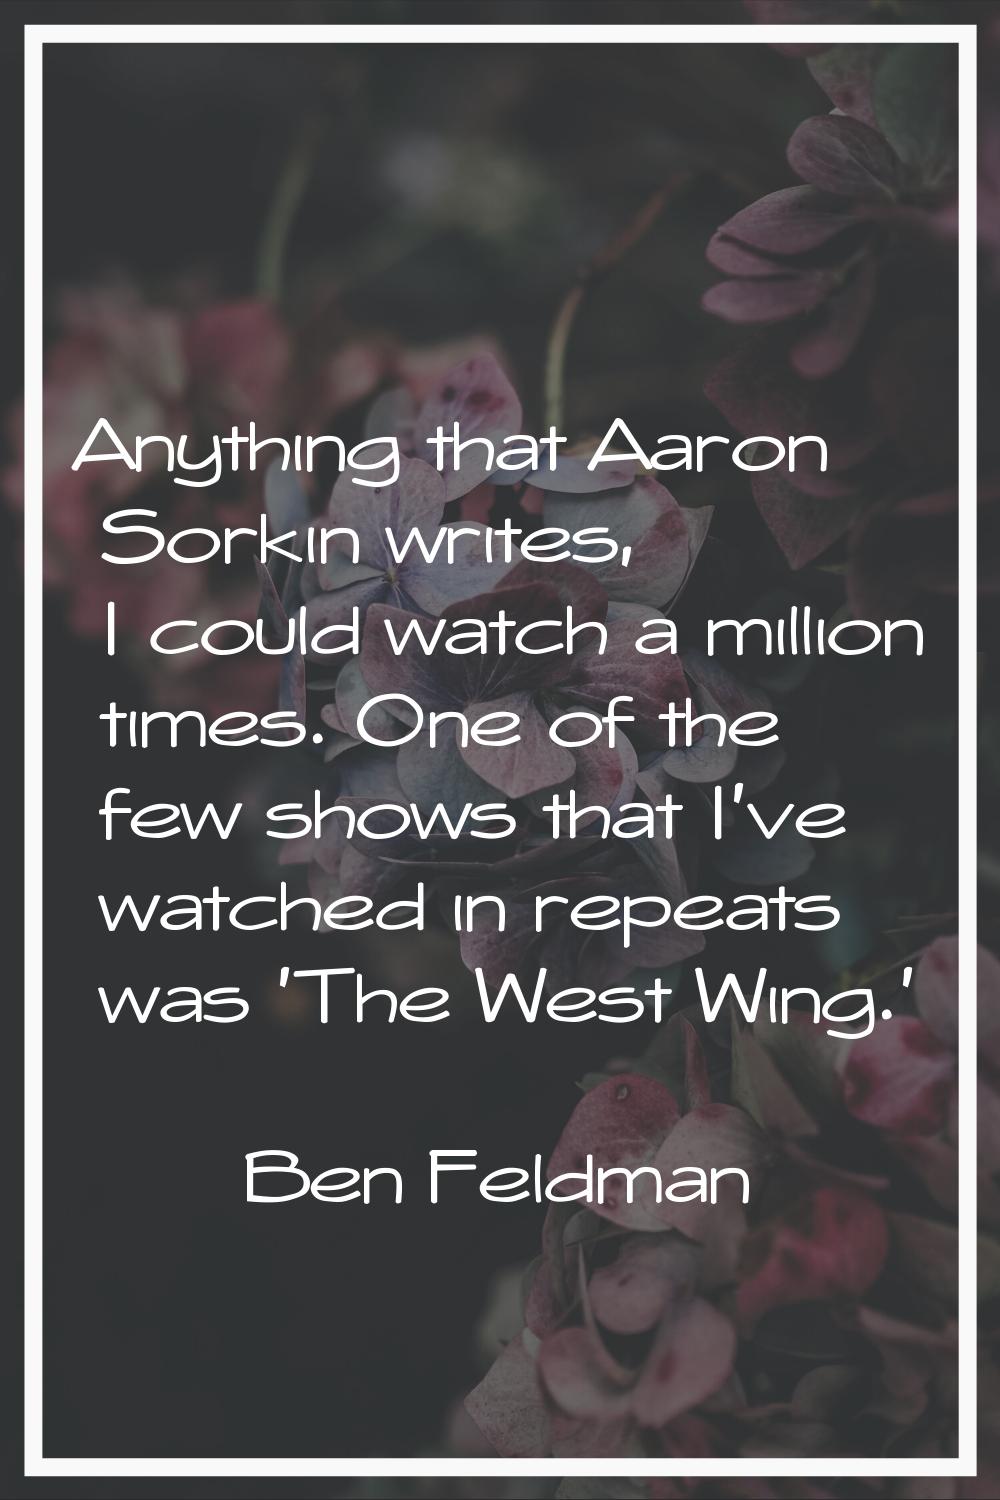 Anything that Aaron Sorkin writes, I could watch a million times. One of the few shows that I've wa